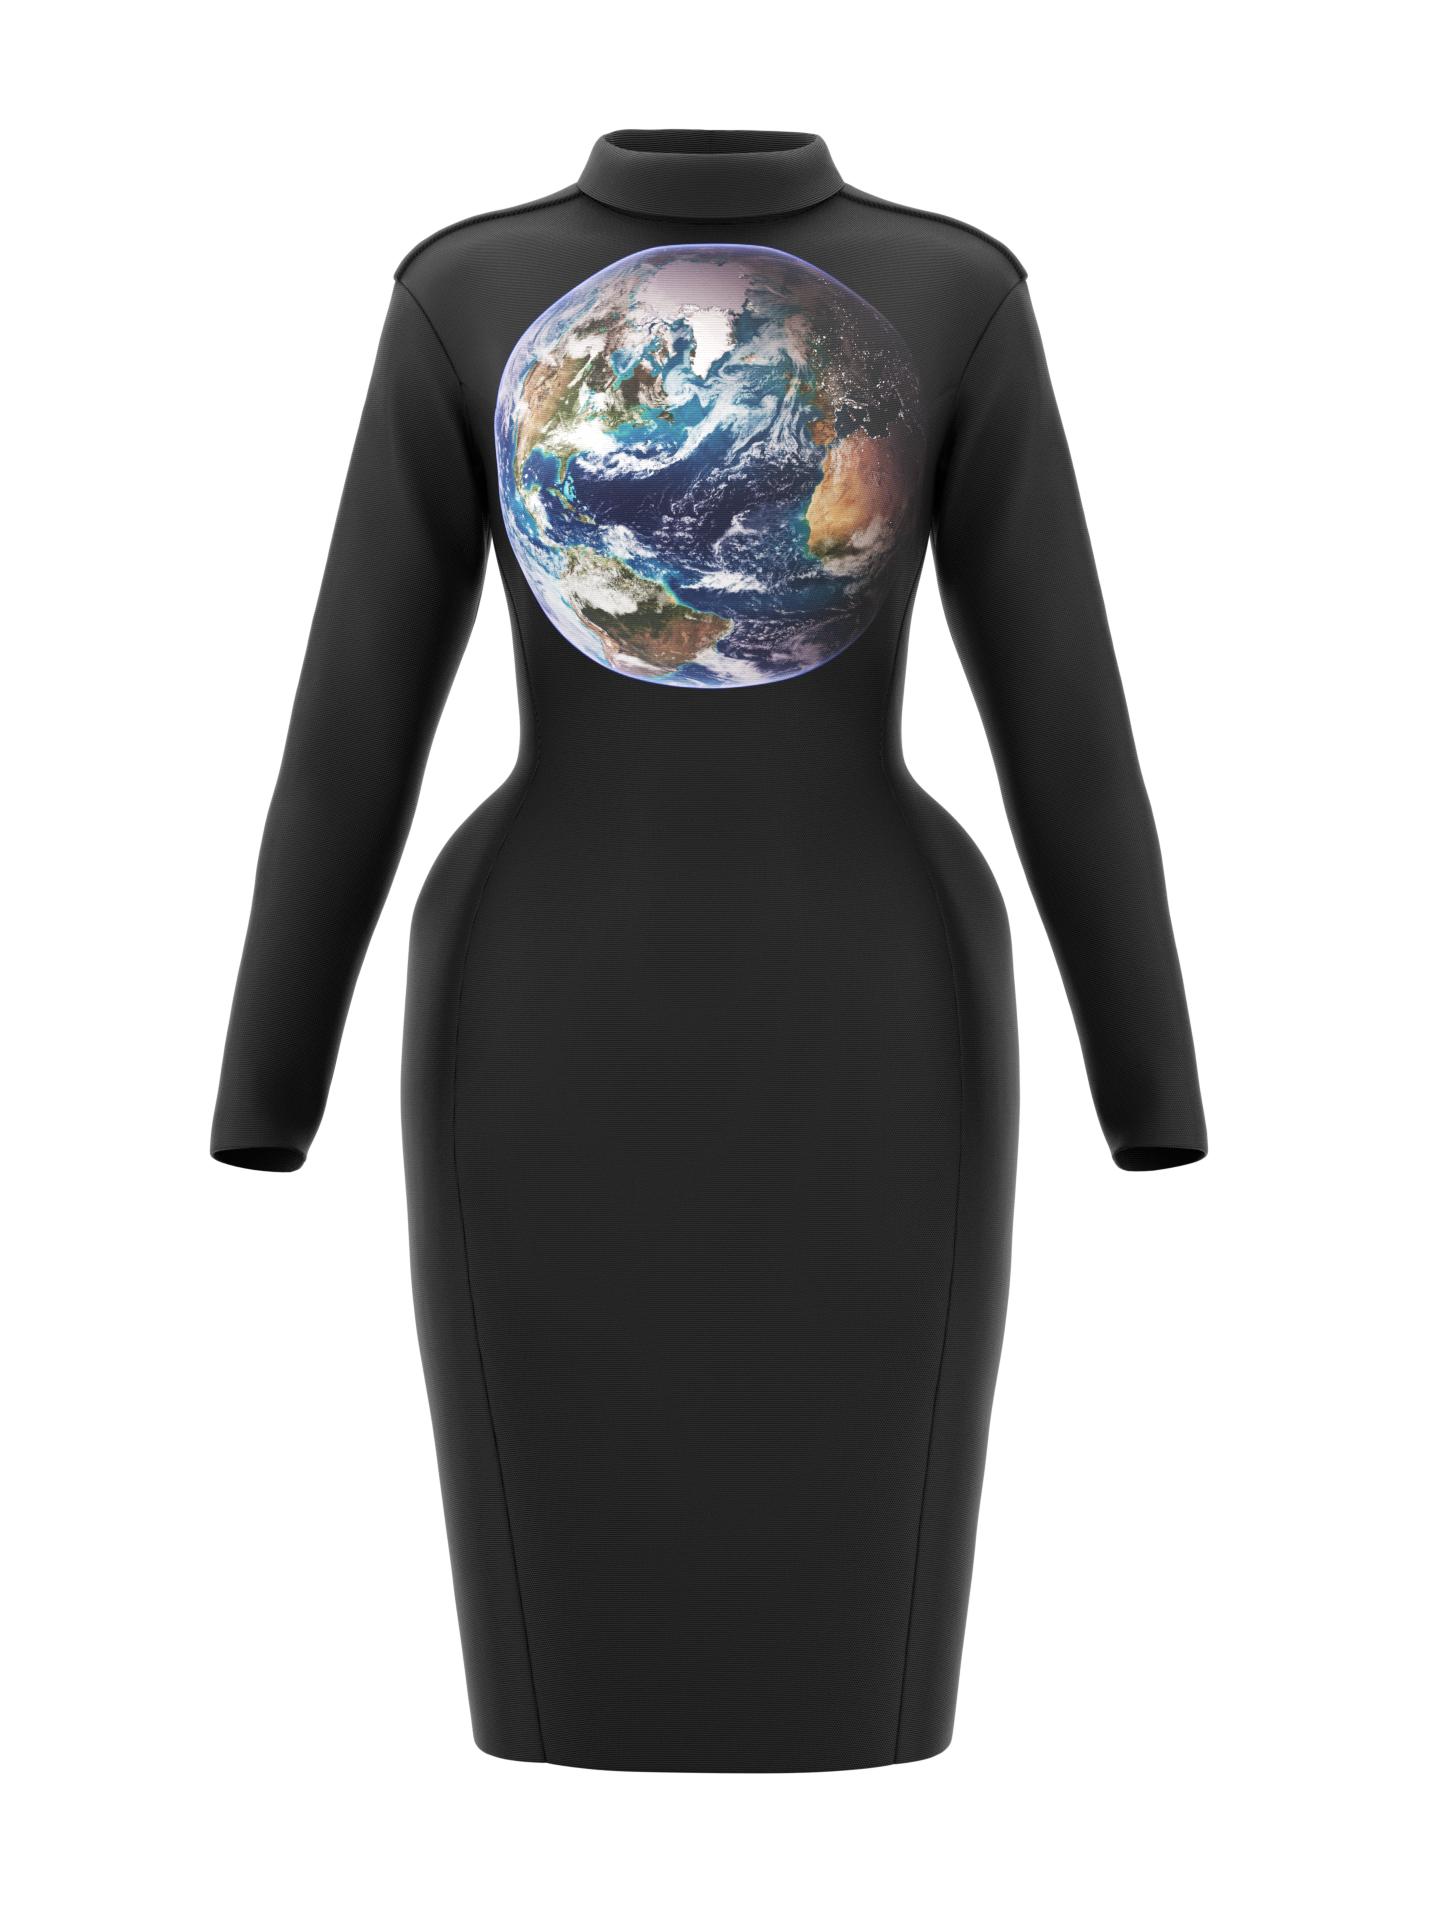 Space Dress -  Blue Marble 2007 by DRESSX UNIVERSE INSPIRED BY NASA